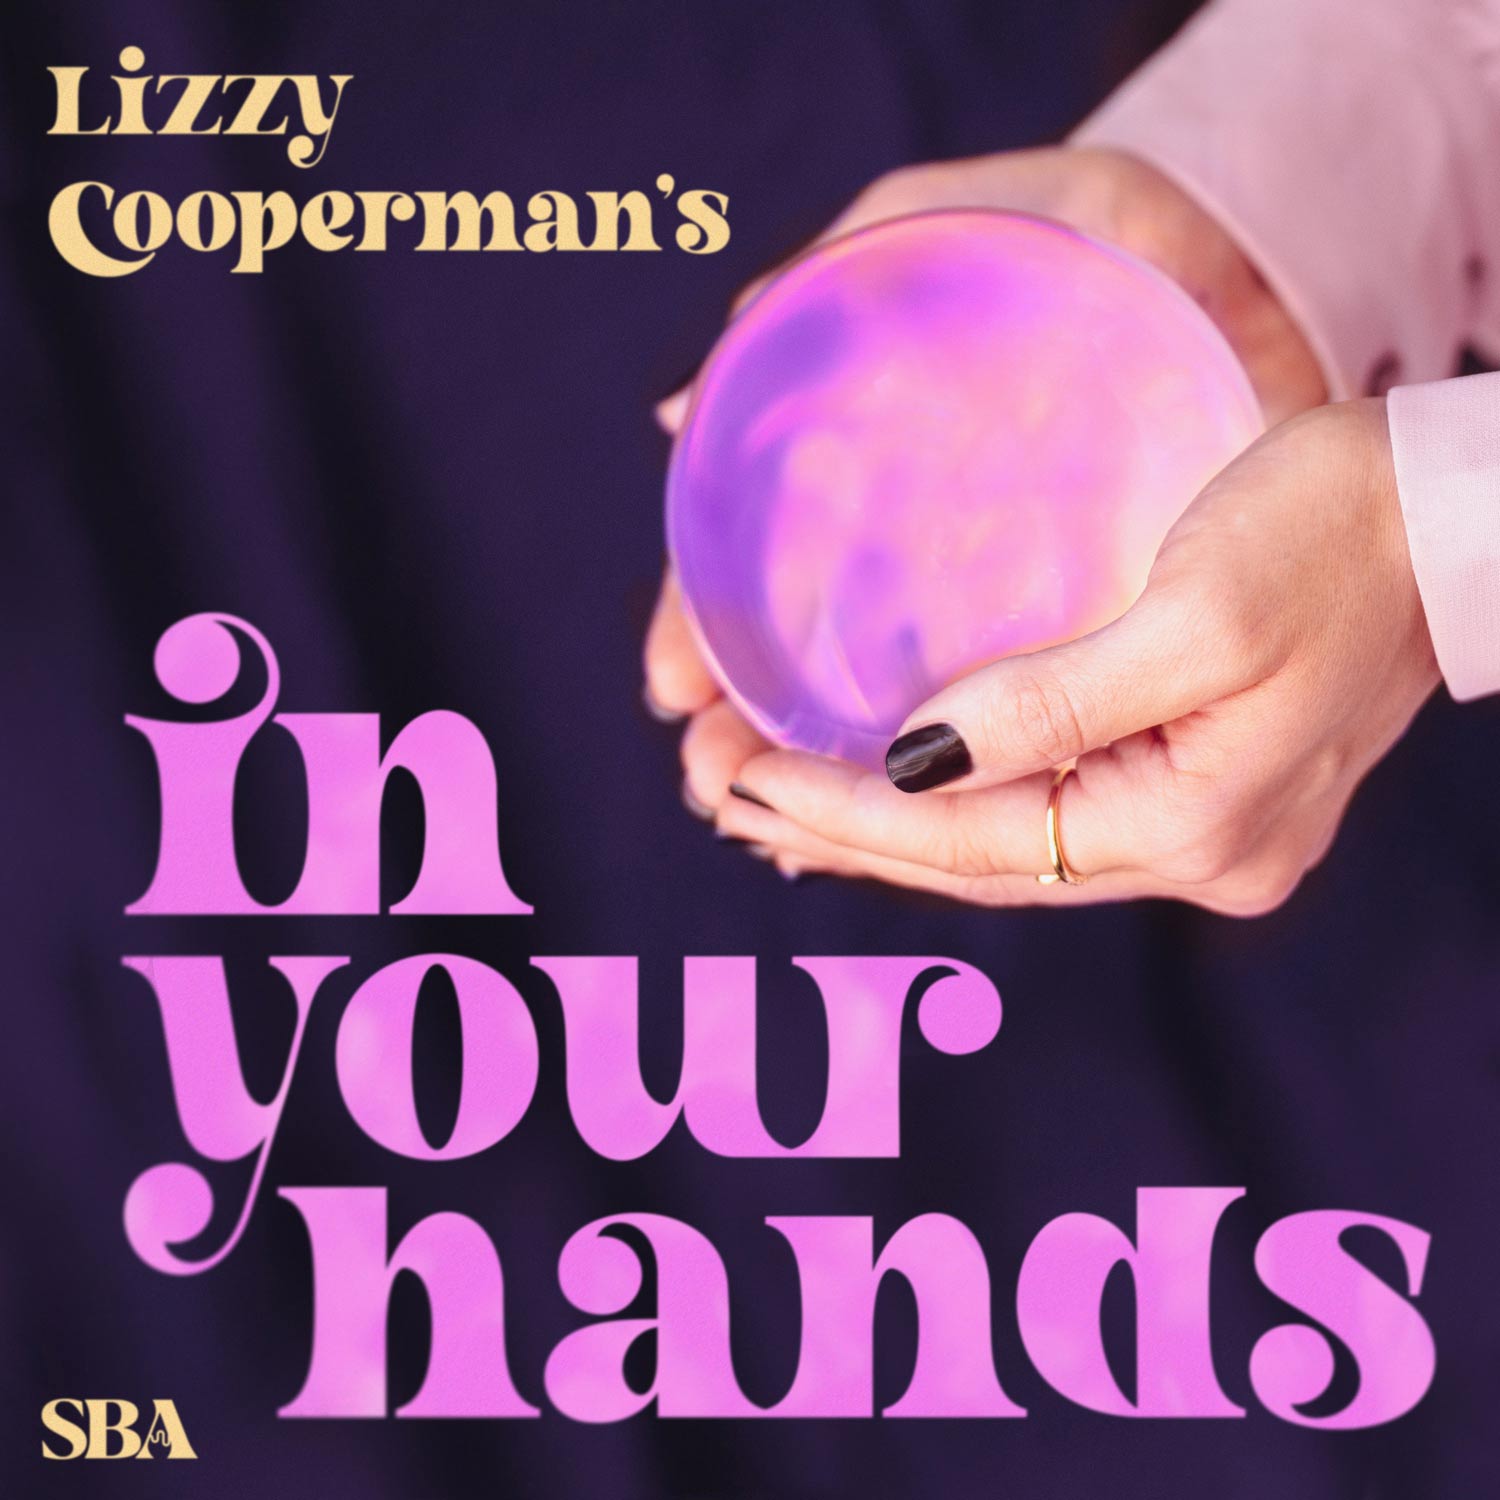 Lizzy Cooperman's In Your Hands Podcast Cover